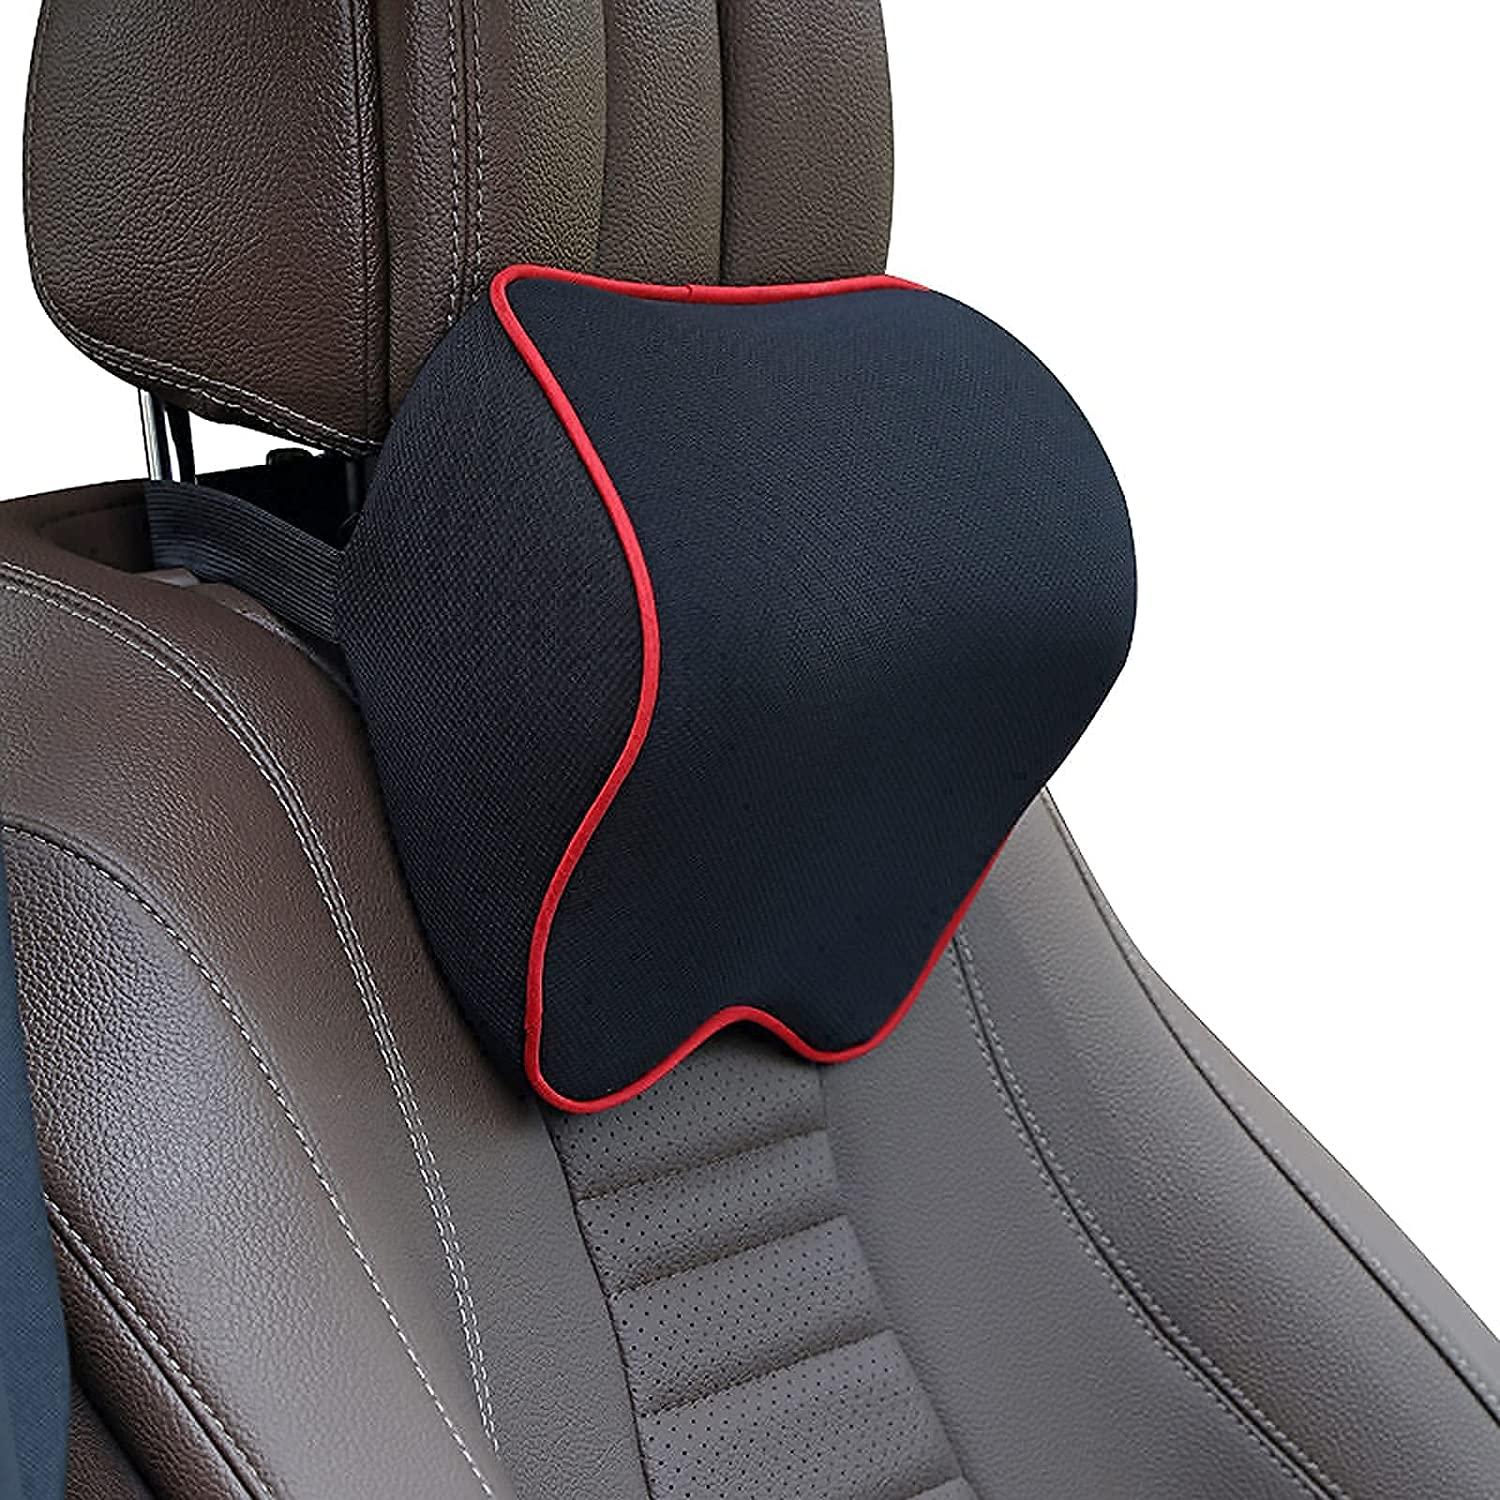 SPRFUFLY Make Relaxing Car Headrest Pillow, Car Pillow for Driving with  Adjustable Strap, Breathable Removable Cover & Ergonomic Design - Softness